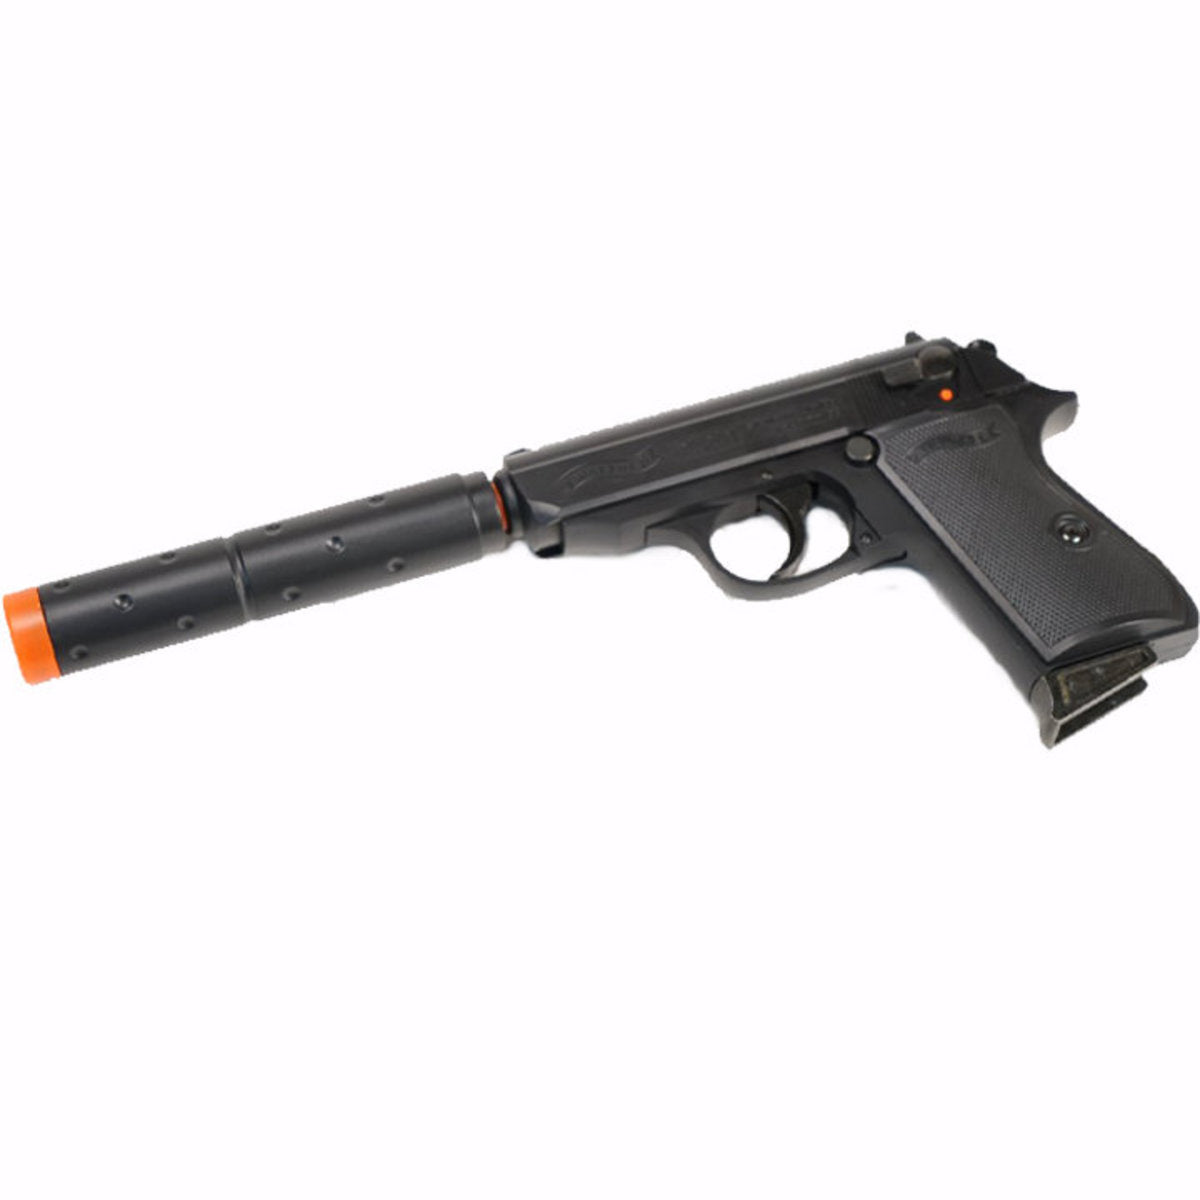 Walther PPK/S Operations Spring Airsoft Pistol Kit